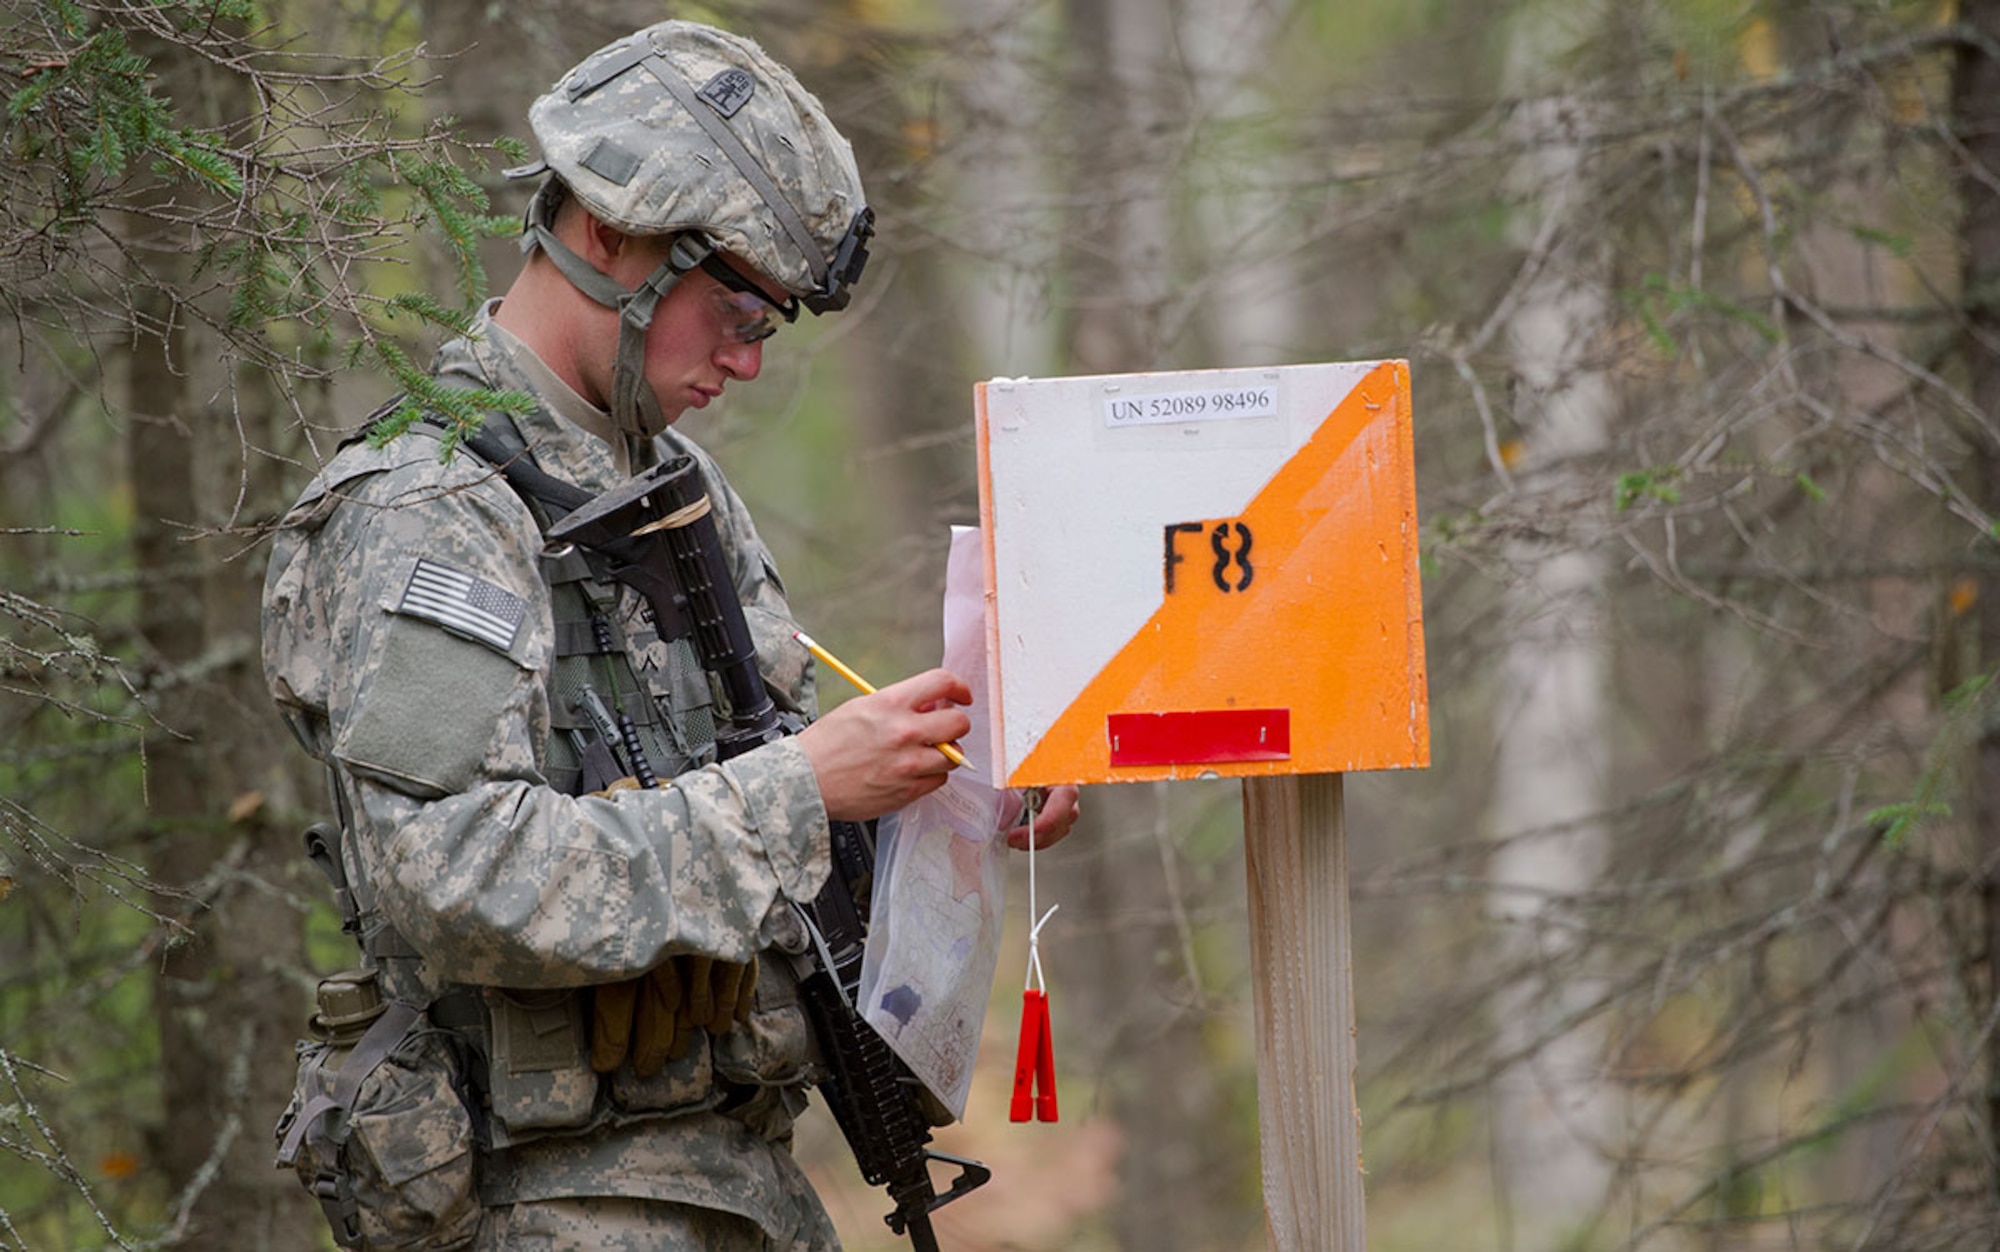 Pvt. Max Fogel, a native of Kansas City, Mo., assigned to Able Company, 3rd Battalion (Airborne), 509th Infantry Regiment, 4th Infantry Brigade Combat Team (Airborne), 25th Infantry Division, U.S. Army Alaska, calculates his next move on the land navigation course during Expert Infantryman Badge qualification on Joint Base Elmendorf-Richardson, Tuesday, Sept. 9, 2014. The Expert Infantryman Badge was approved by the Secretary of War on October 7, 1943, and is currently awarded to U.S. Army personnel who hold infantry or special forces military occupational specialties and successfully pass the rigors of the course. (U.S. Air Force photo/Justin Connaher)